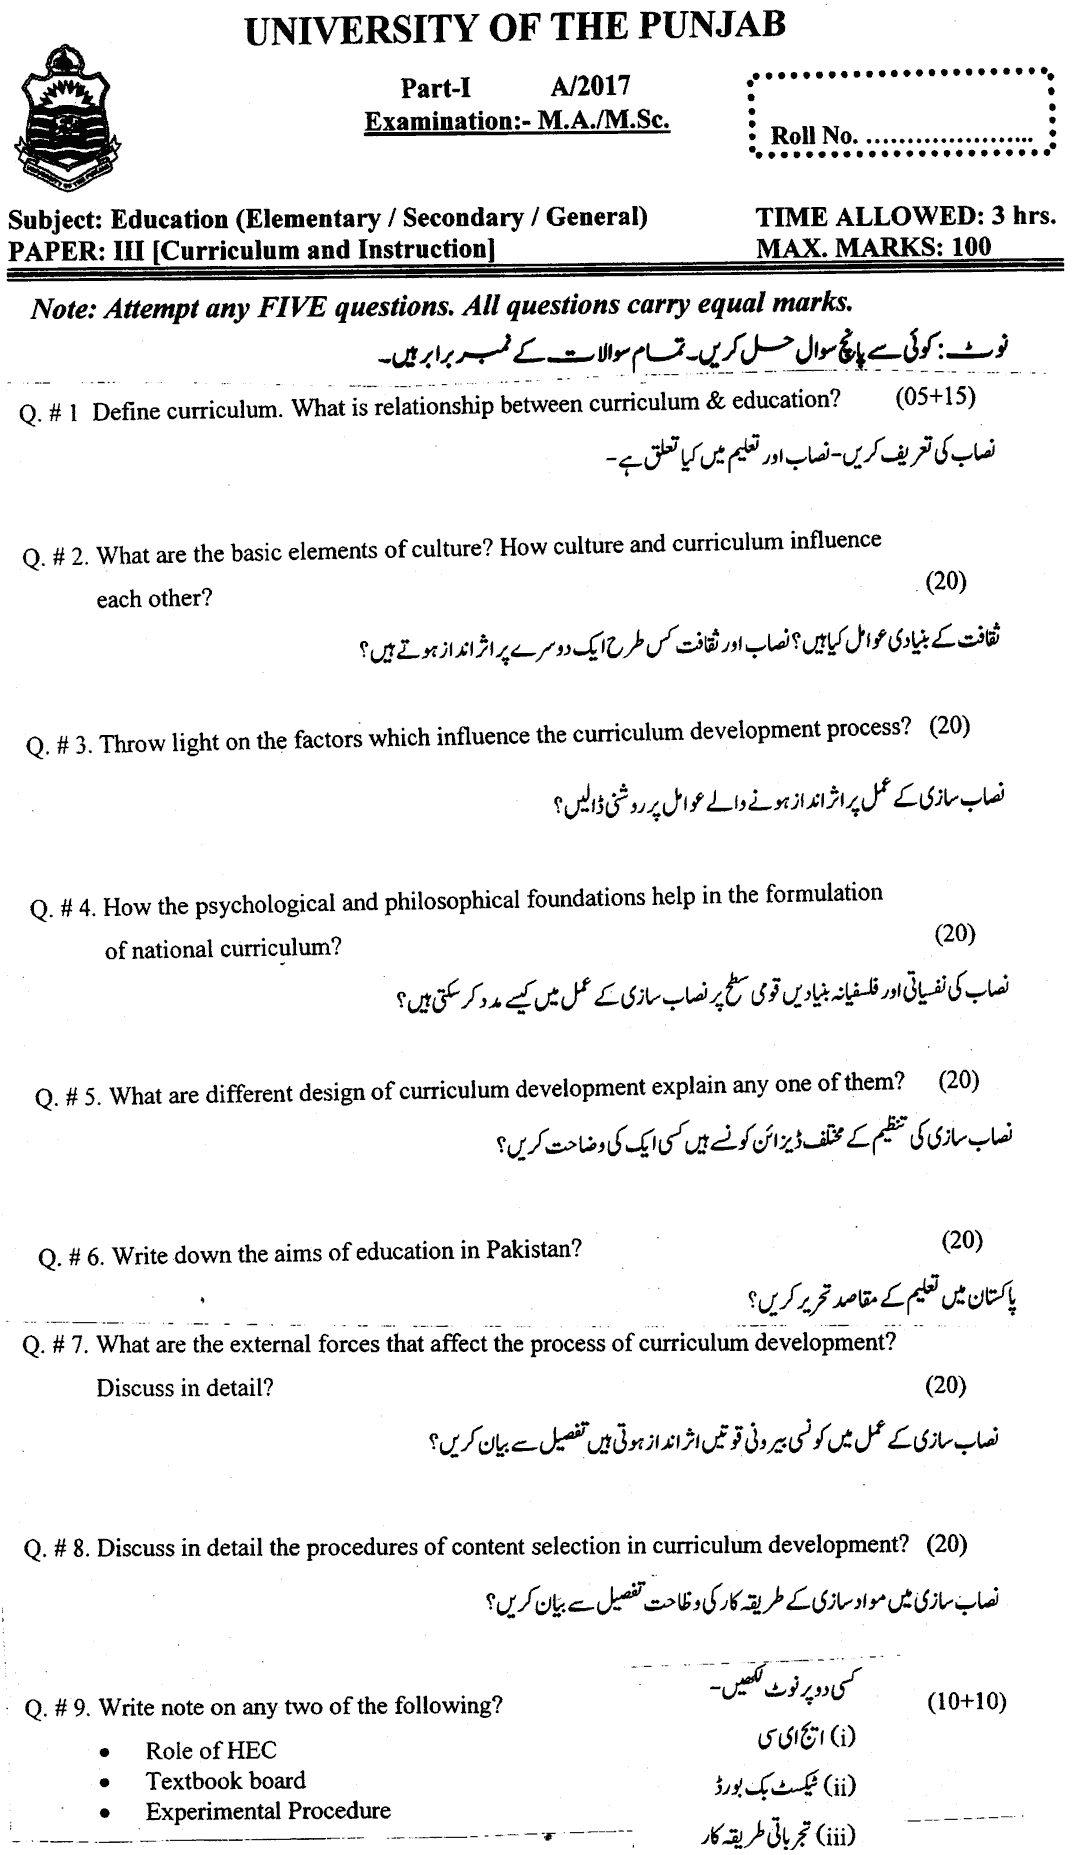 Ma Part 1 Education Elementary Curriculum And Instruction Past Paper 2017 Punjab University